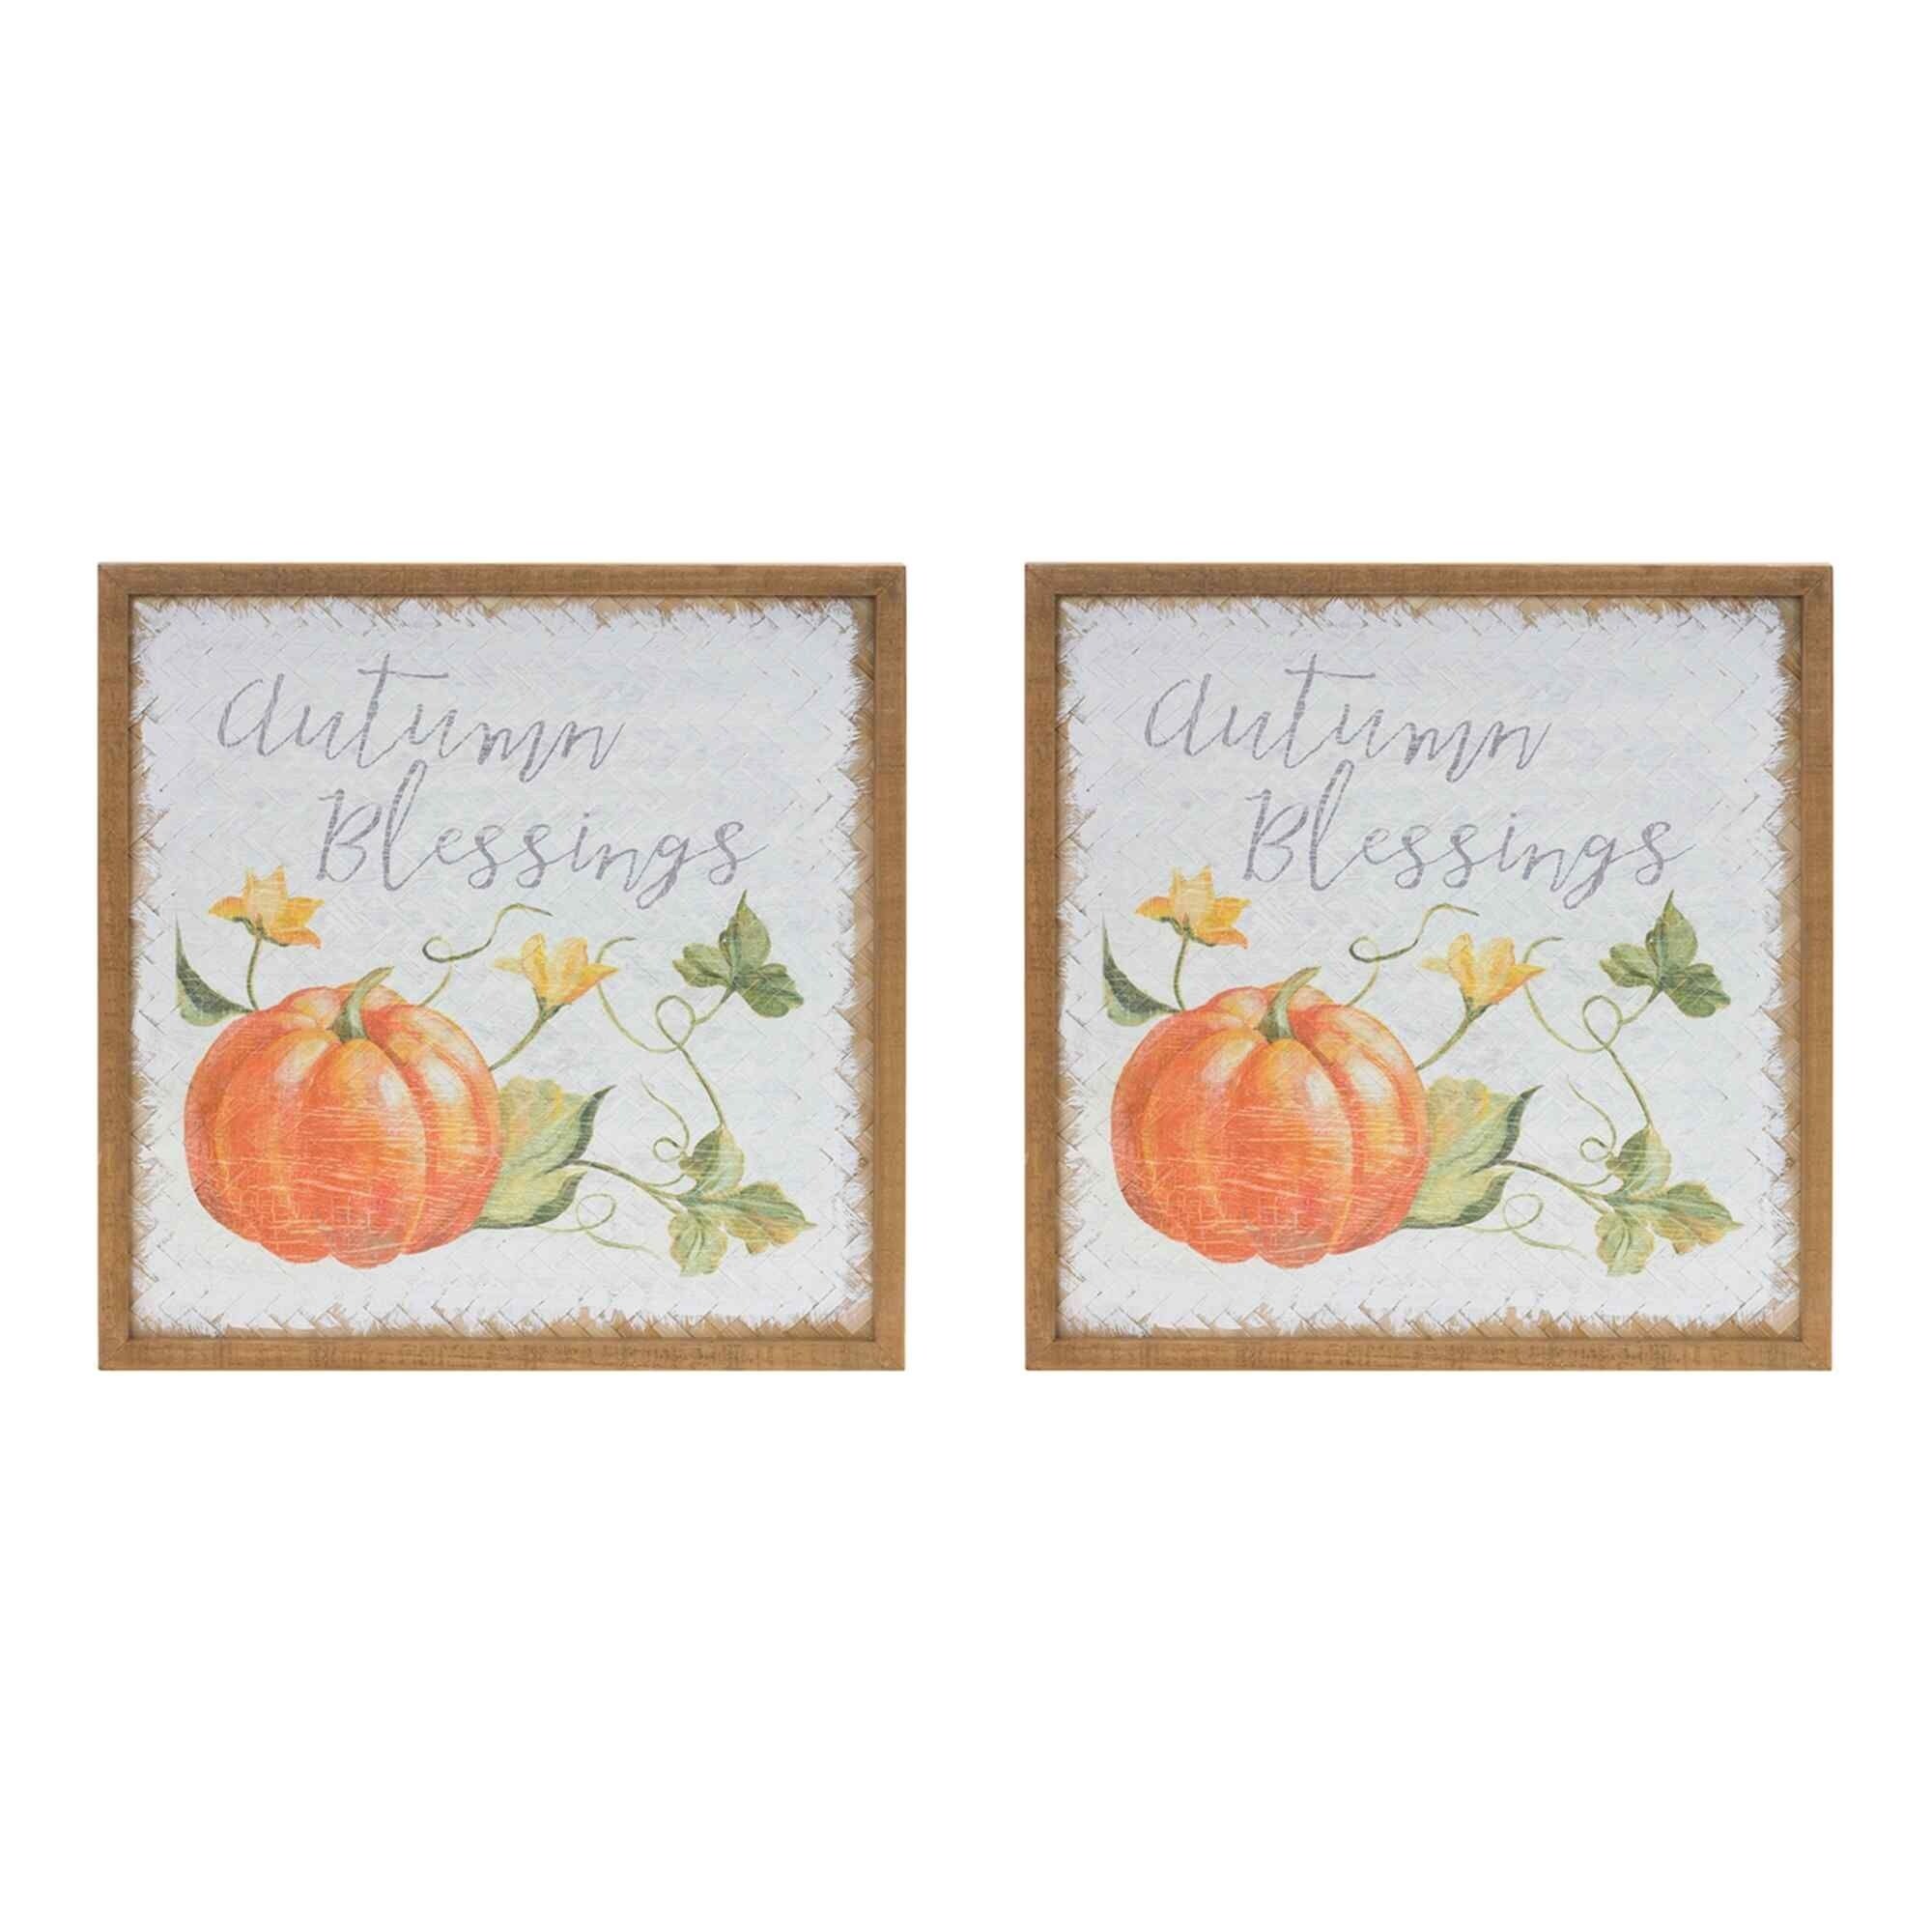 Set of 2 White and Orange Autumn Blessing Pumpkin Wall Signs 15.75"